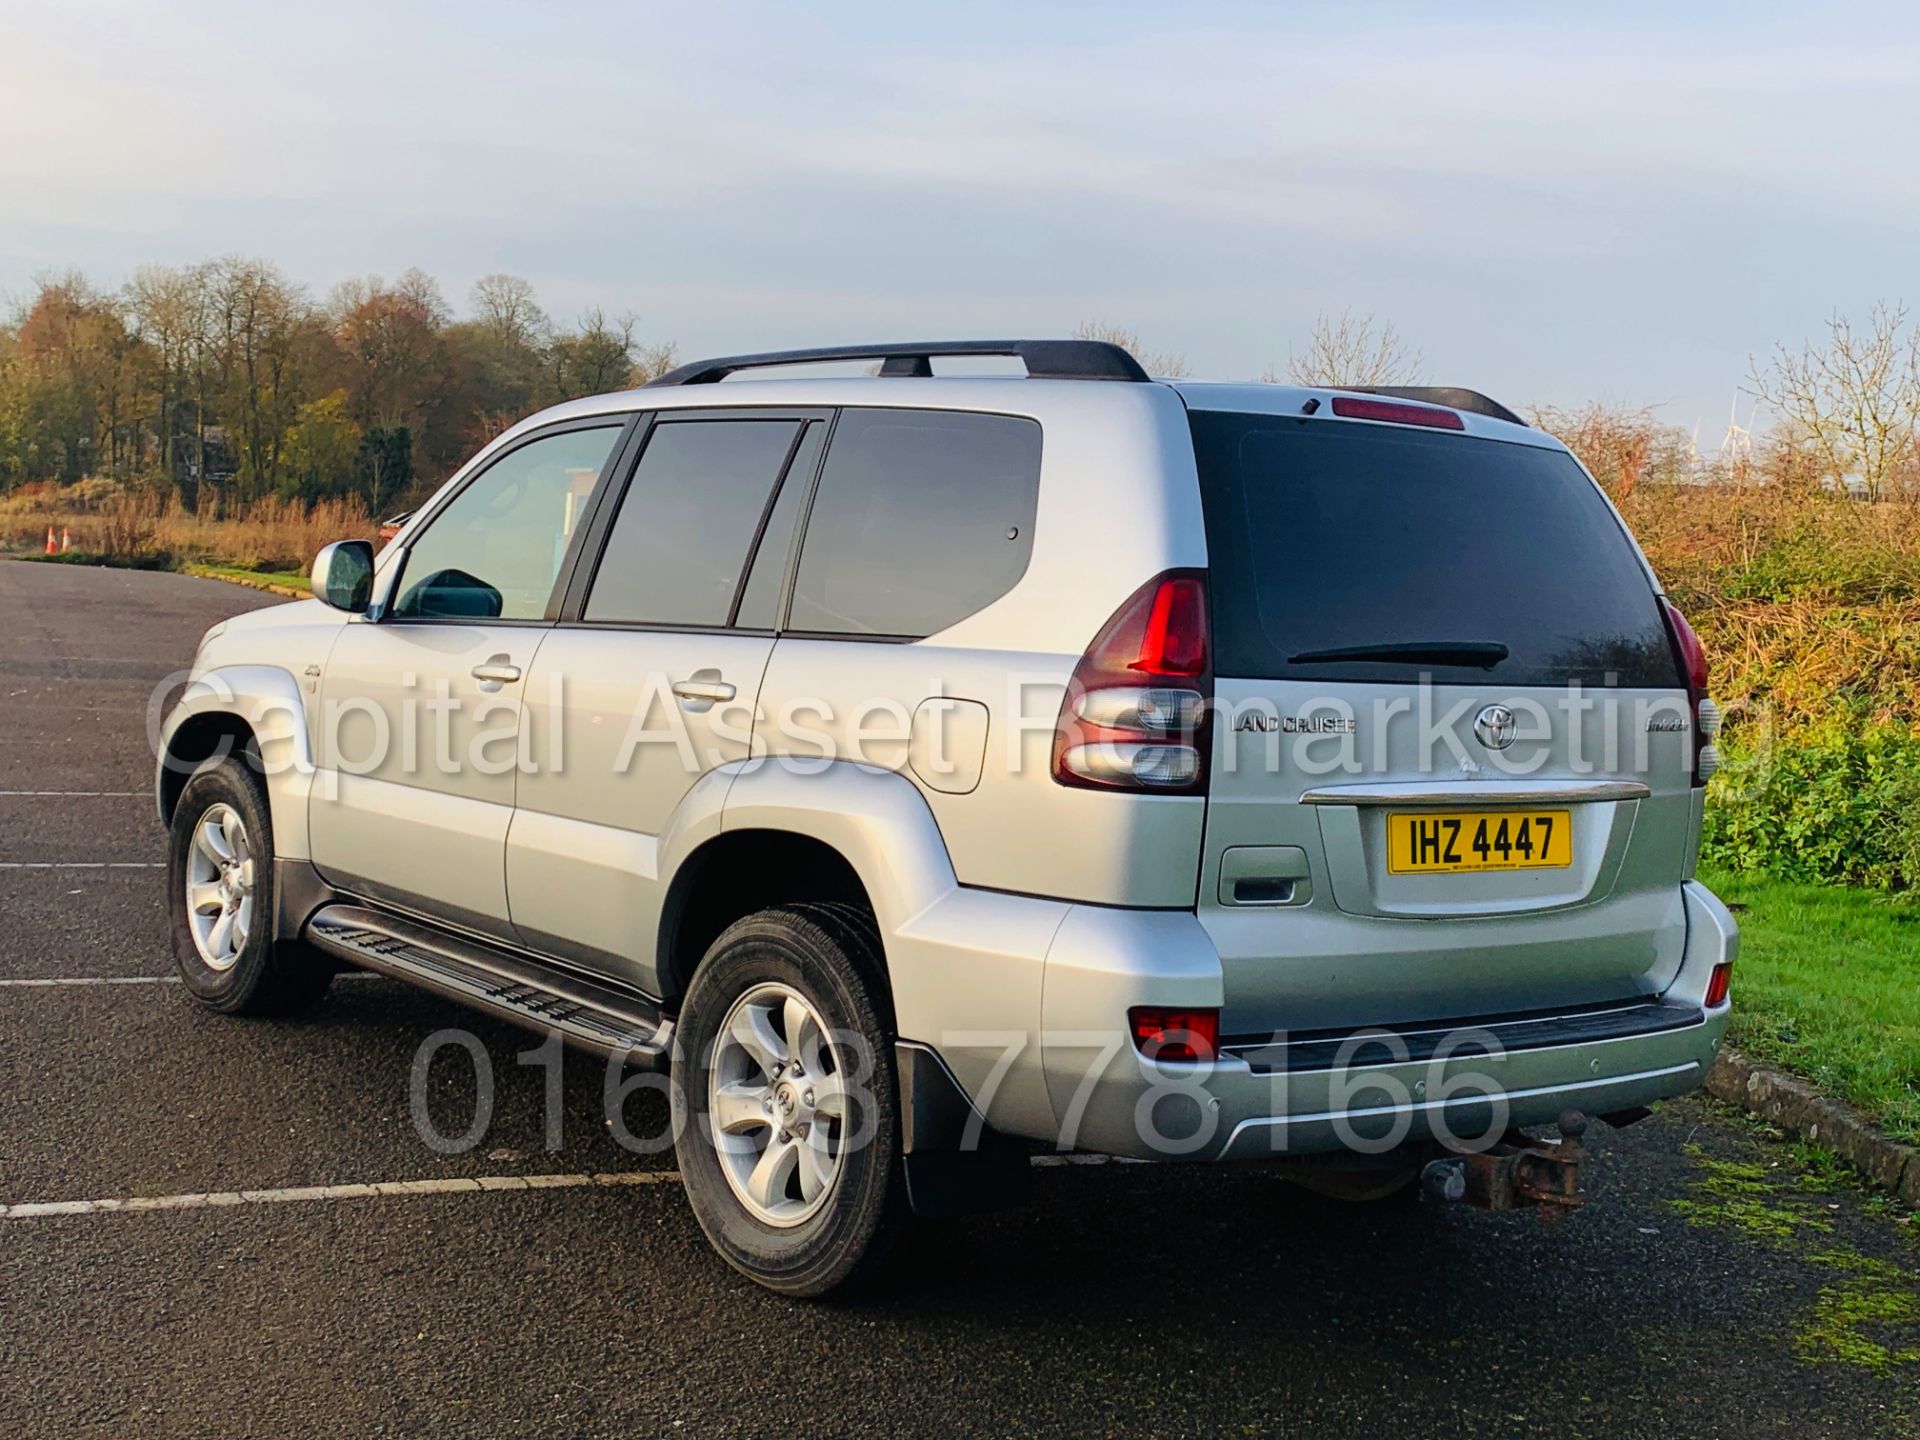 TOYOTA LAND CRUISER *INVINCIBLE* 7 SEATER SUV (2007 MODEL) '3.0 D-4D -AUTOMATIC' *TOP SPEC* (NO VAT) - Image 9 of 50